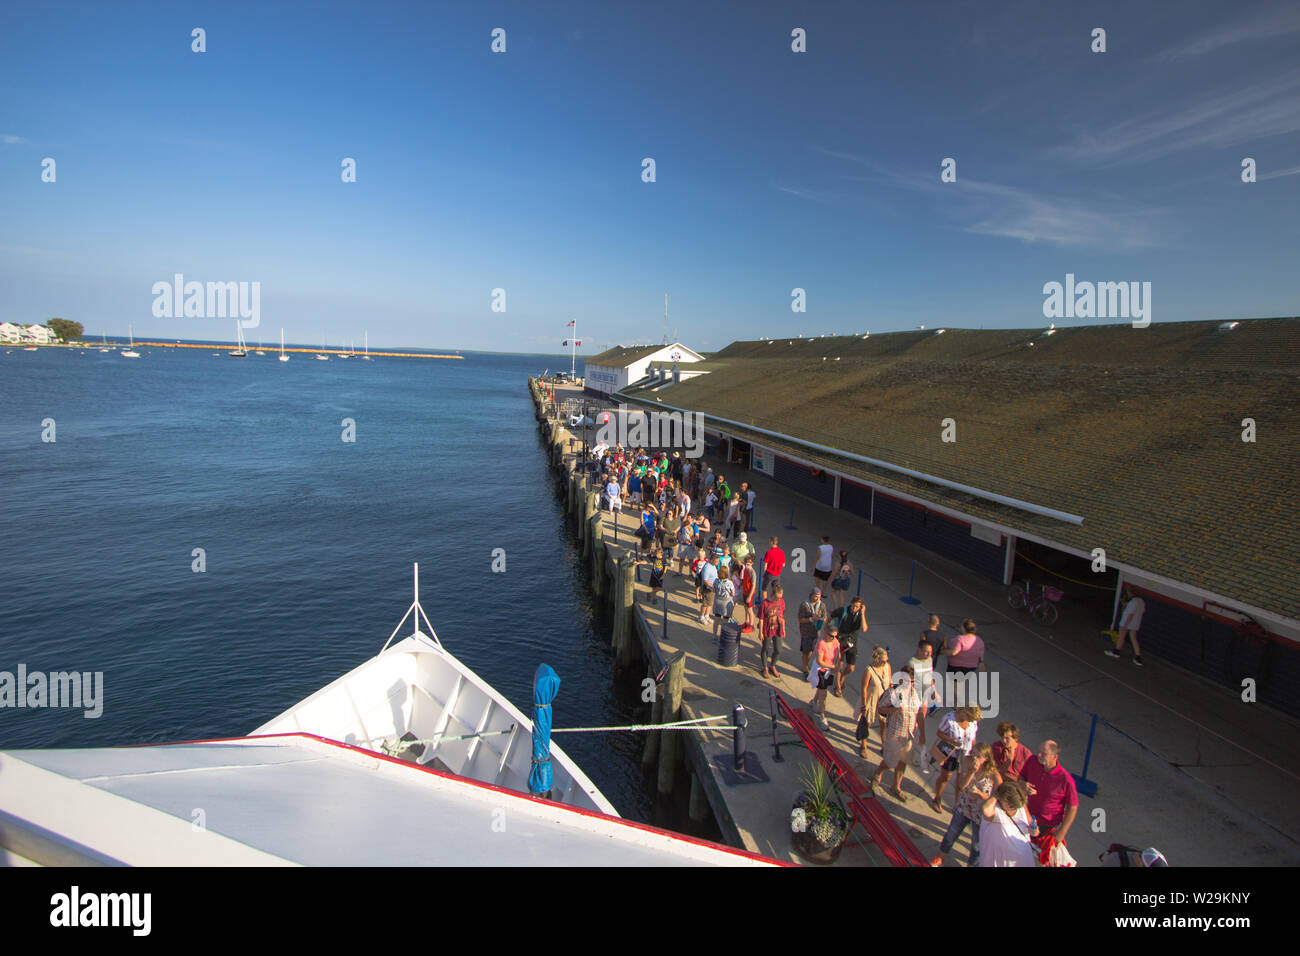 Mackinaw Island, Michigan, USA - Crowds of people wait on a dock for a ferry back to mainland Michigan after a day on Mackinac Island. Stock Photo